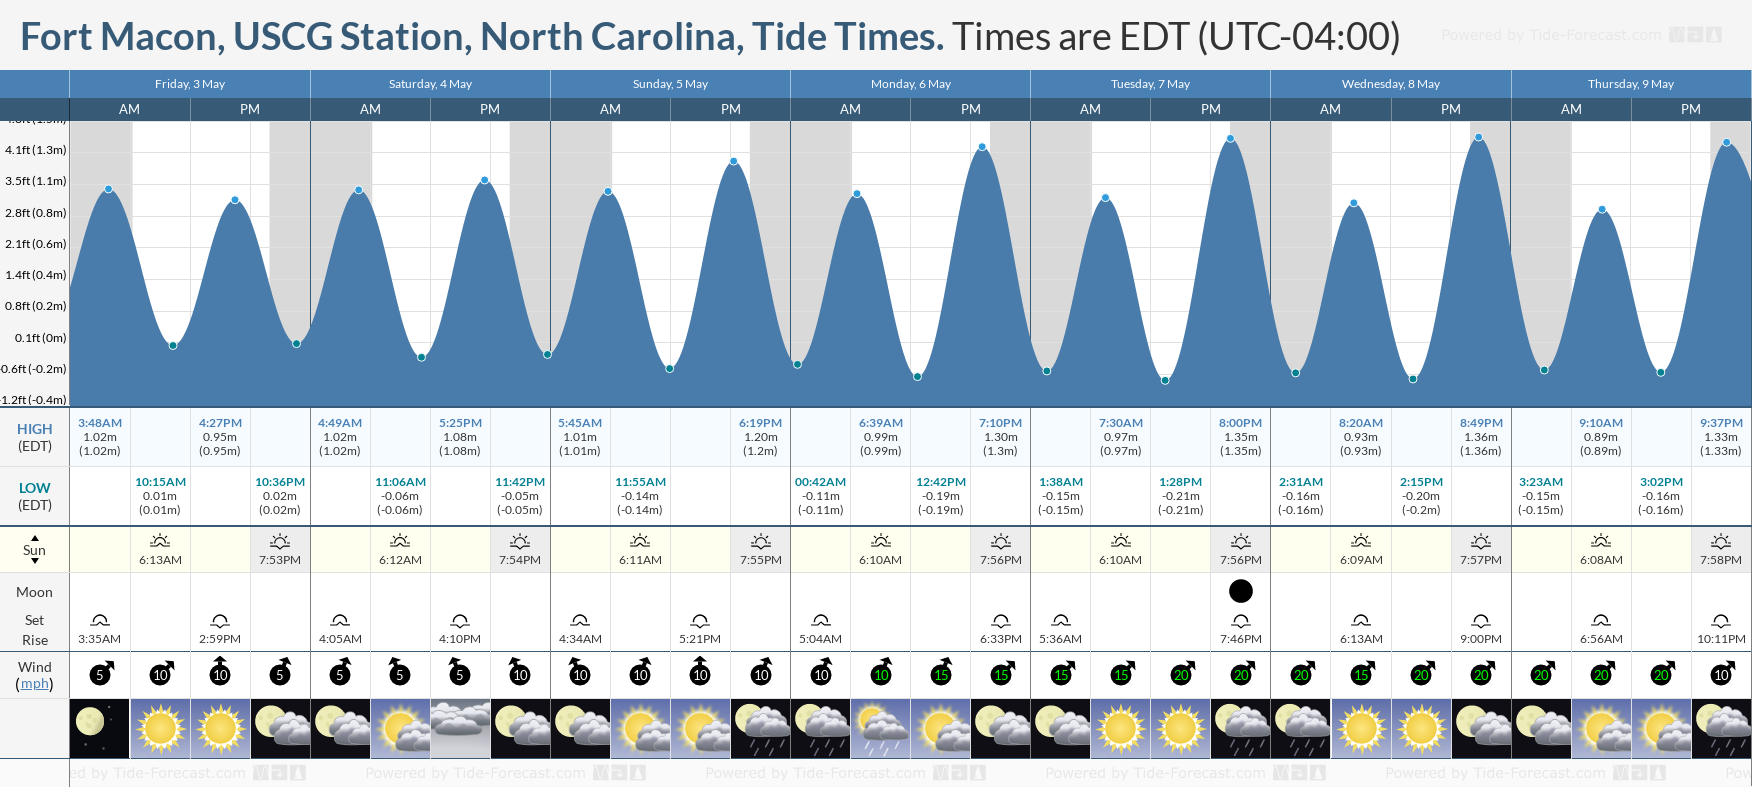 Fort Macon, USCG Station, North Carolina Tide Chart including high and low tide tide times for the next 7 days